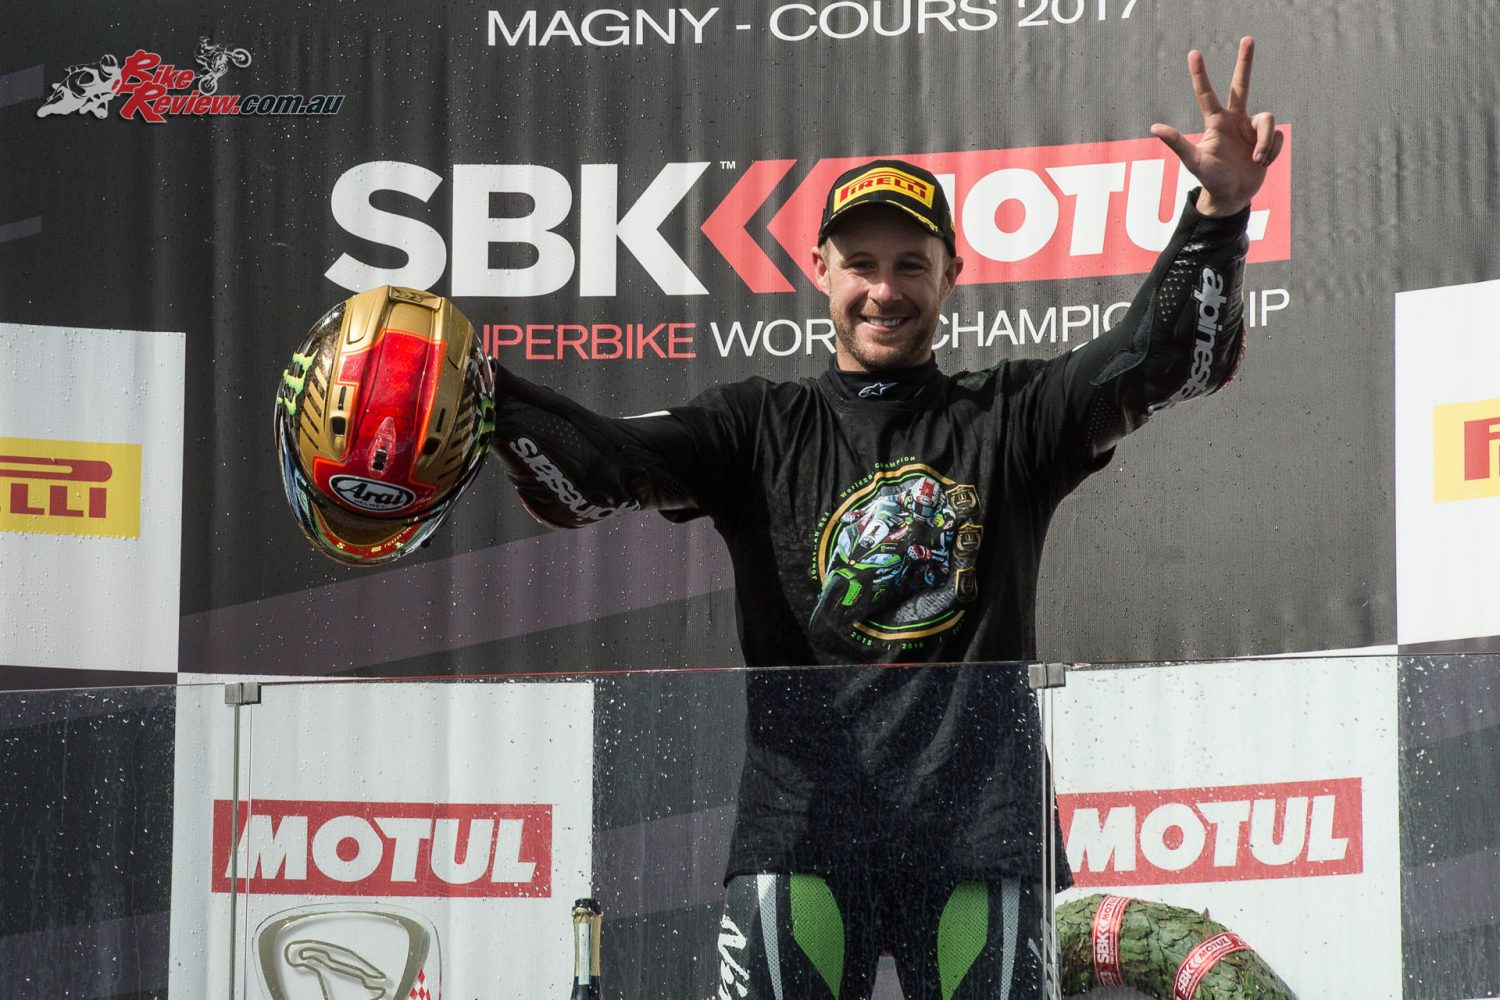 Jonathan Rea wins his third consecutive WSBK title - Image: BeeGee Images